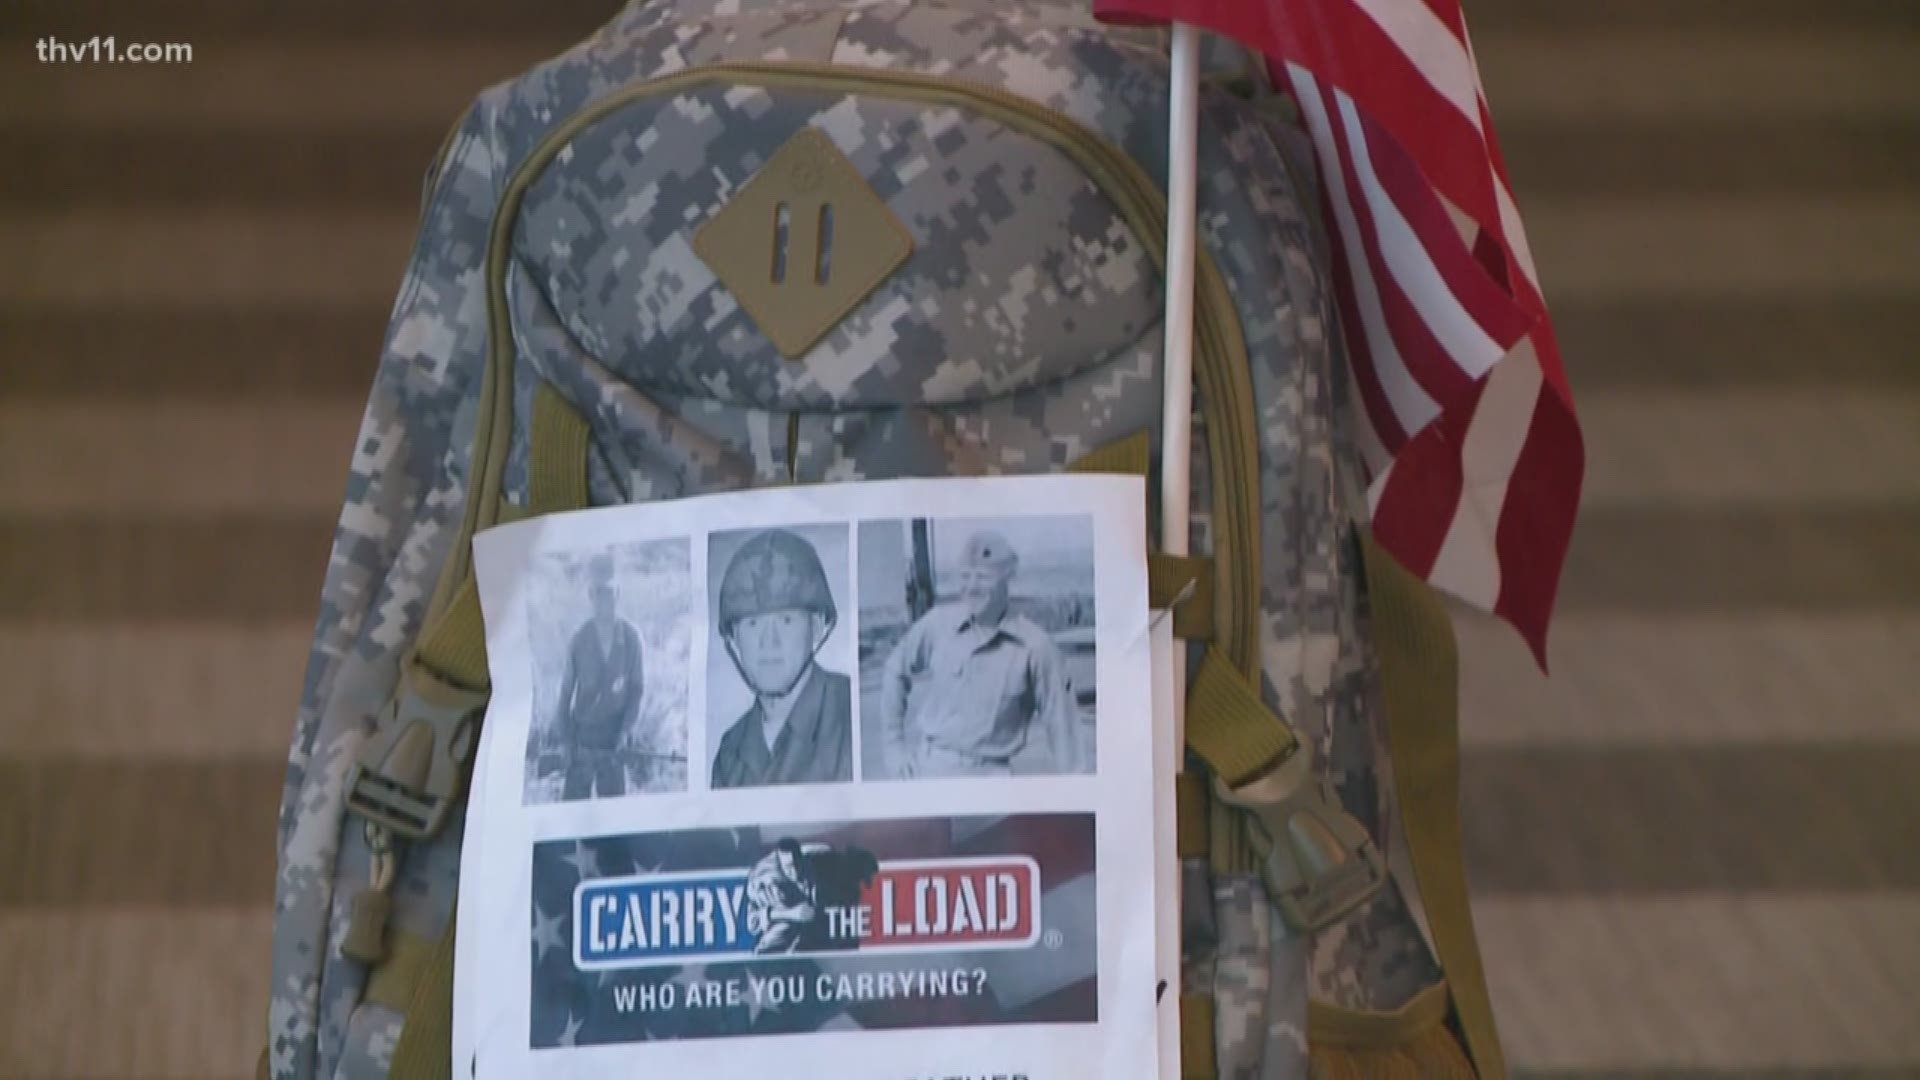 On Tuesday, hundreds of people in Central Arkansas will “Carry the Load” in honor of the nation’s fallen heroes, including first responders and soldiers.